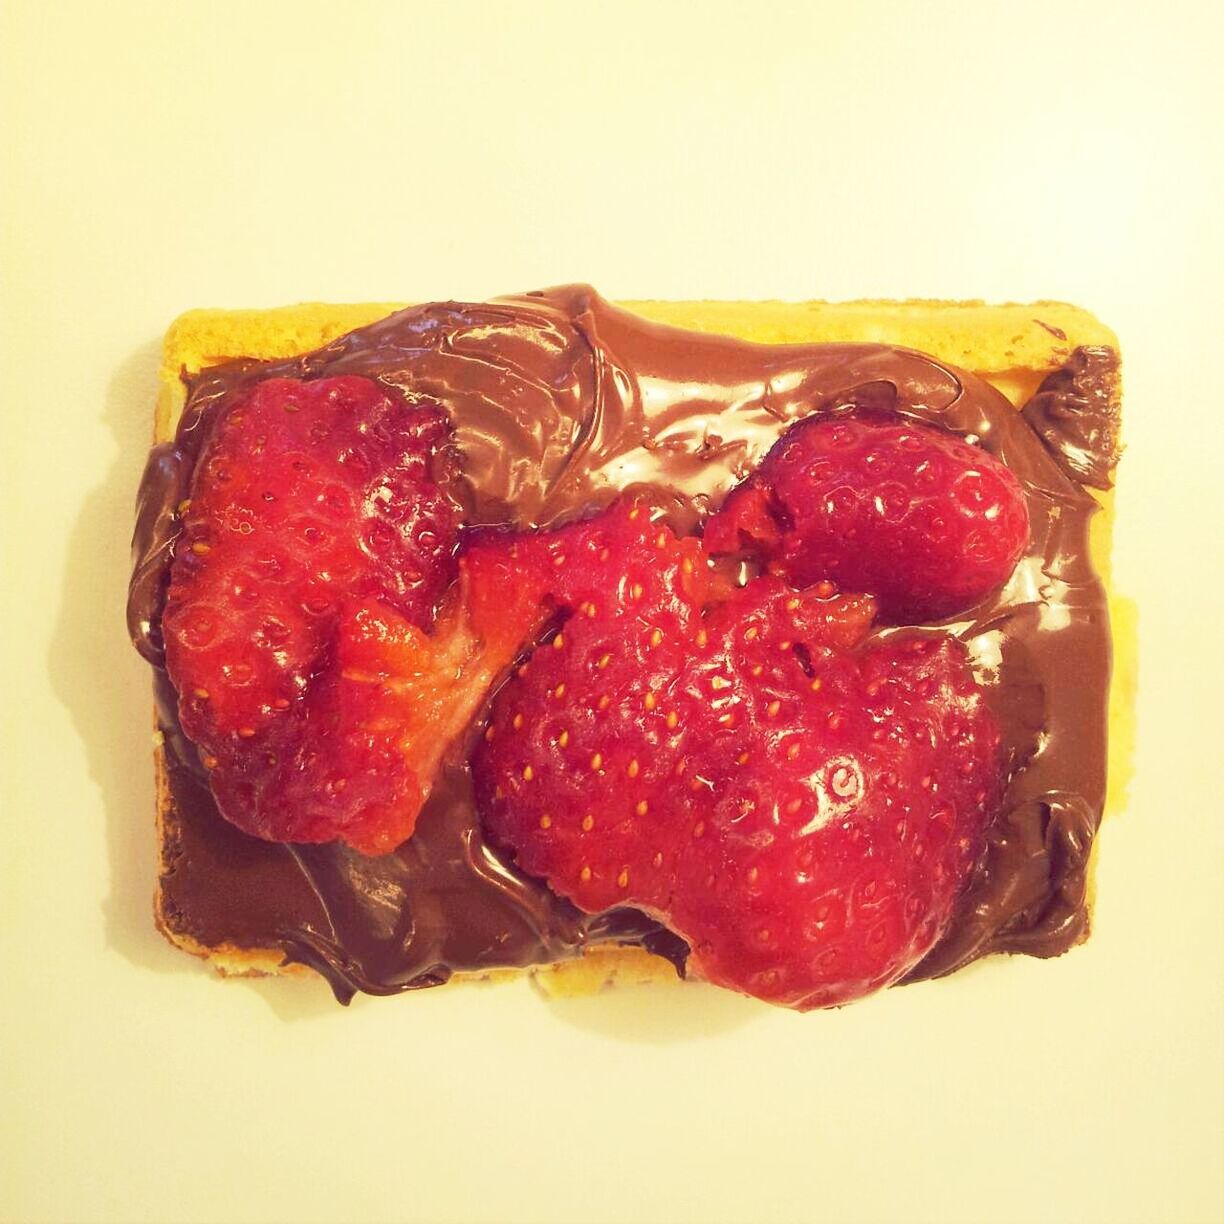 Close-up of strawberry and chocolate spread on waffle